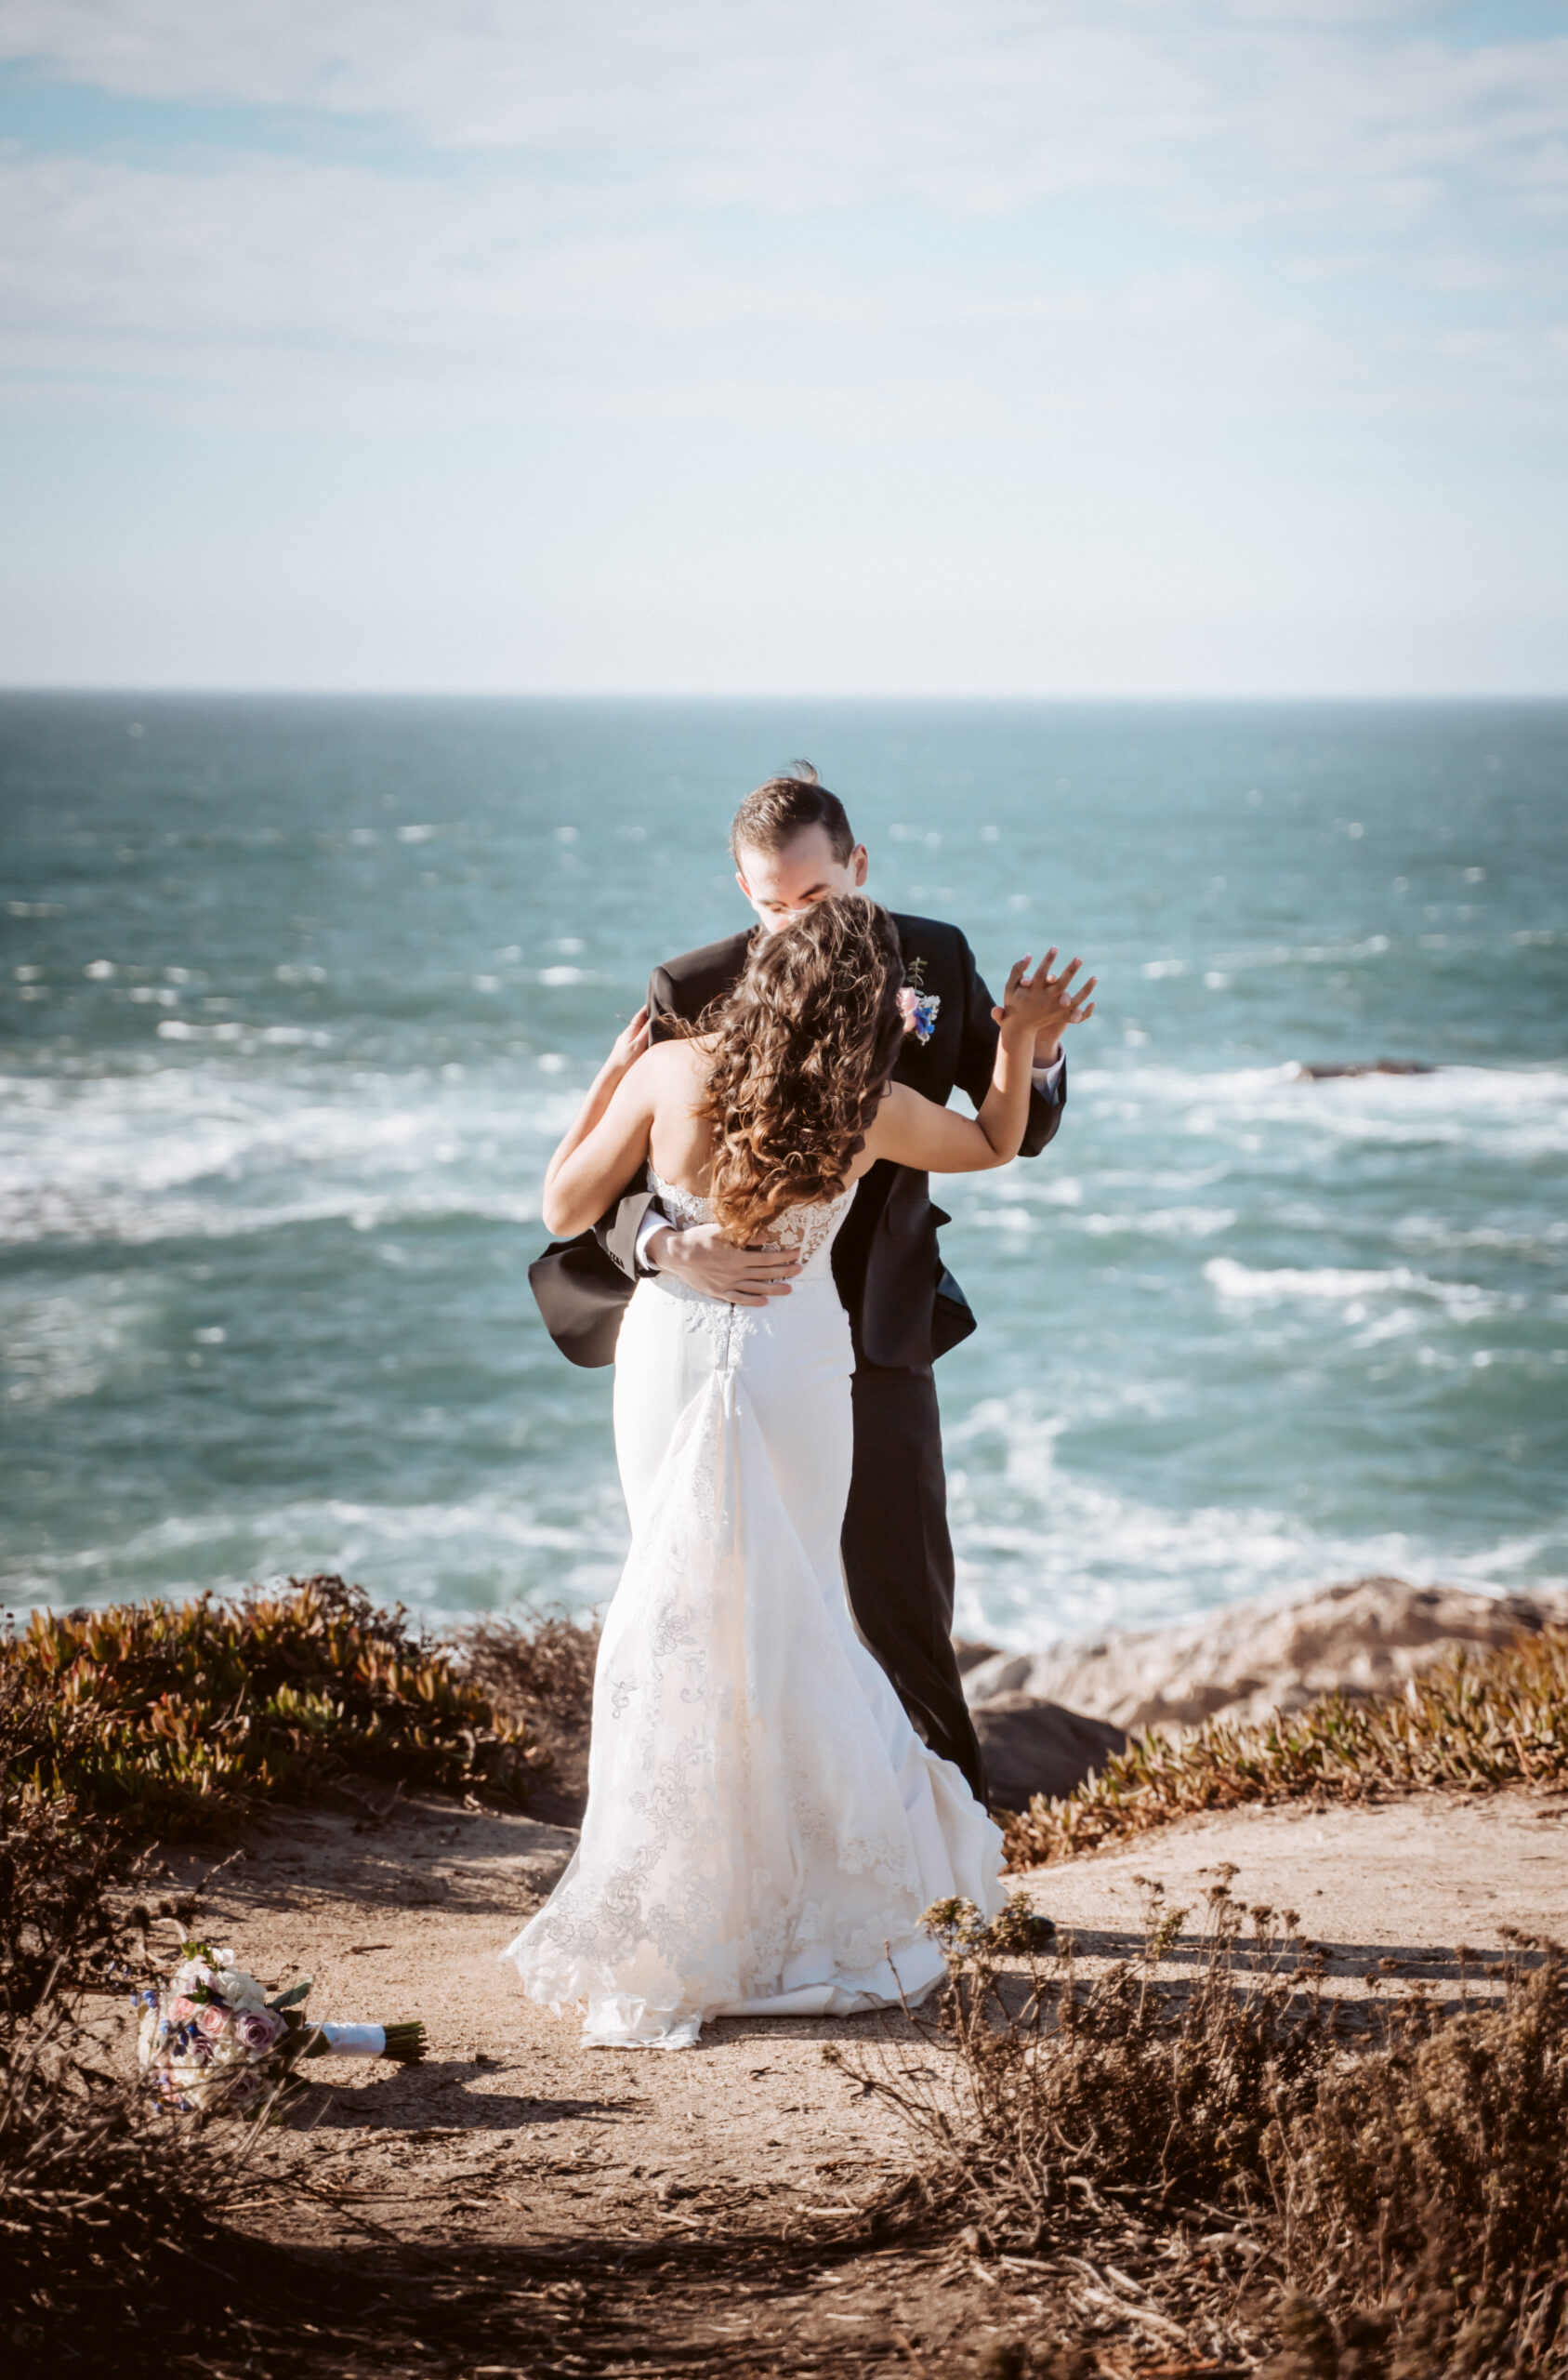 A bride and groom dancing on a cliff overlooking the ocean in Big Sur California for their Elopement day